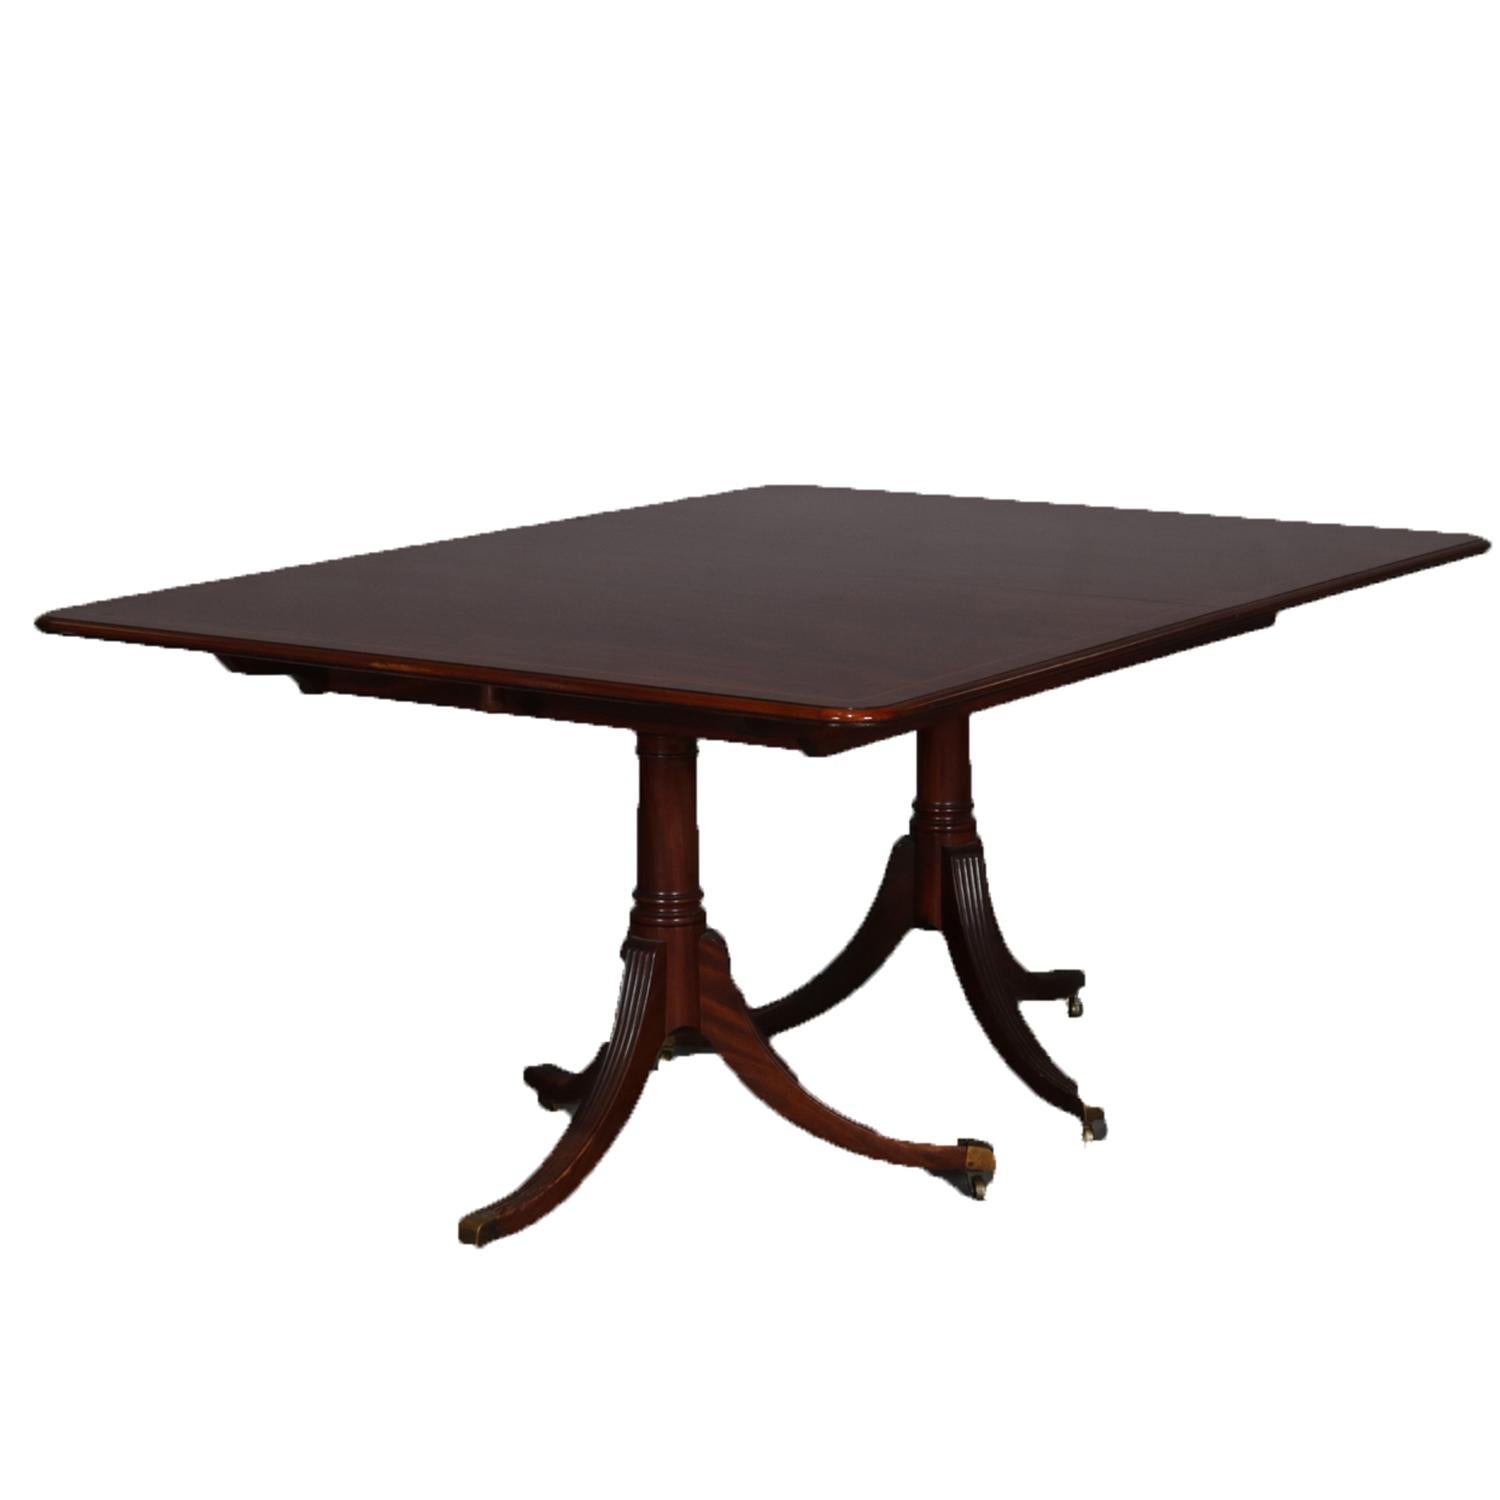 Antique Duncan Phyfe School dining table features mahogany construction with cross banded top having satinwood inlay, single leaf and raised on double tripod pedestals each having three reeded concave legs terminating in bronze caps with casters,